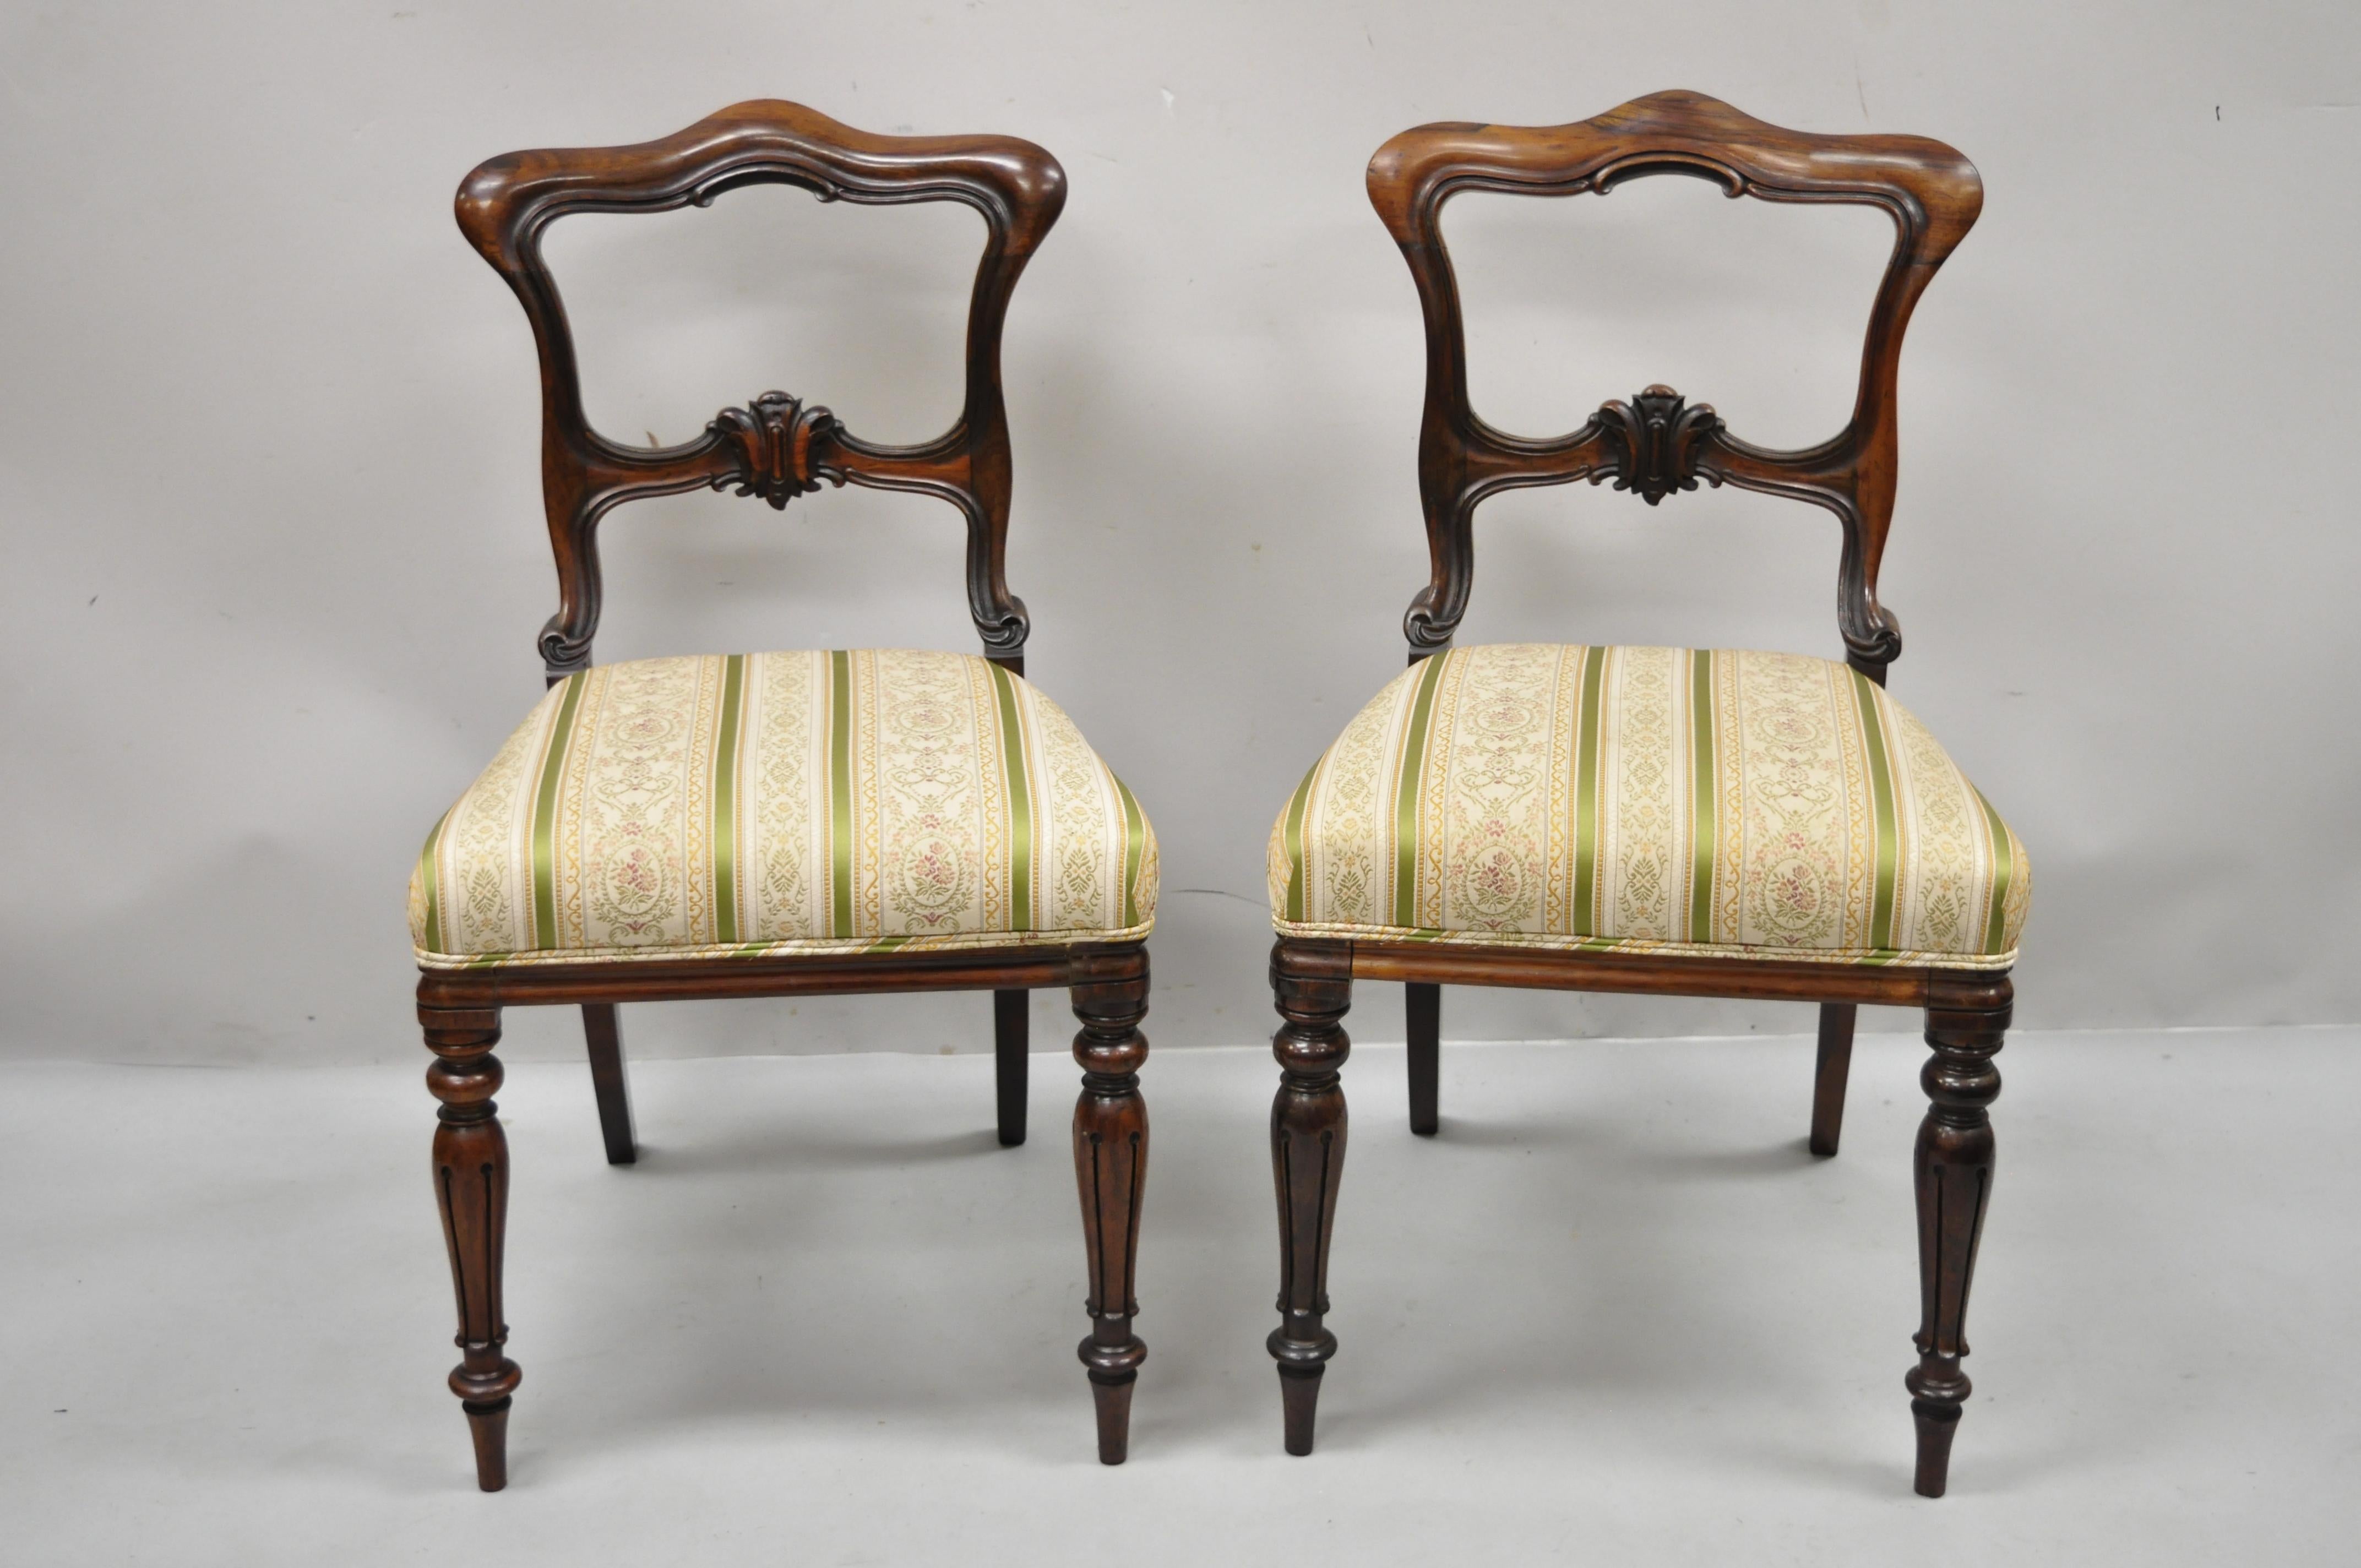 Antique Victorian Art Nouveau Transitional rosewood carved Parlor side chairs - a pair. Item features solid rosewood frame, beautiful wood grain, nicely upholstered seat, nicely carved details, tapered legs, shapley saber legs, very nice antique